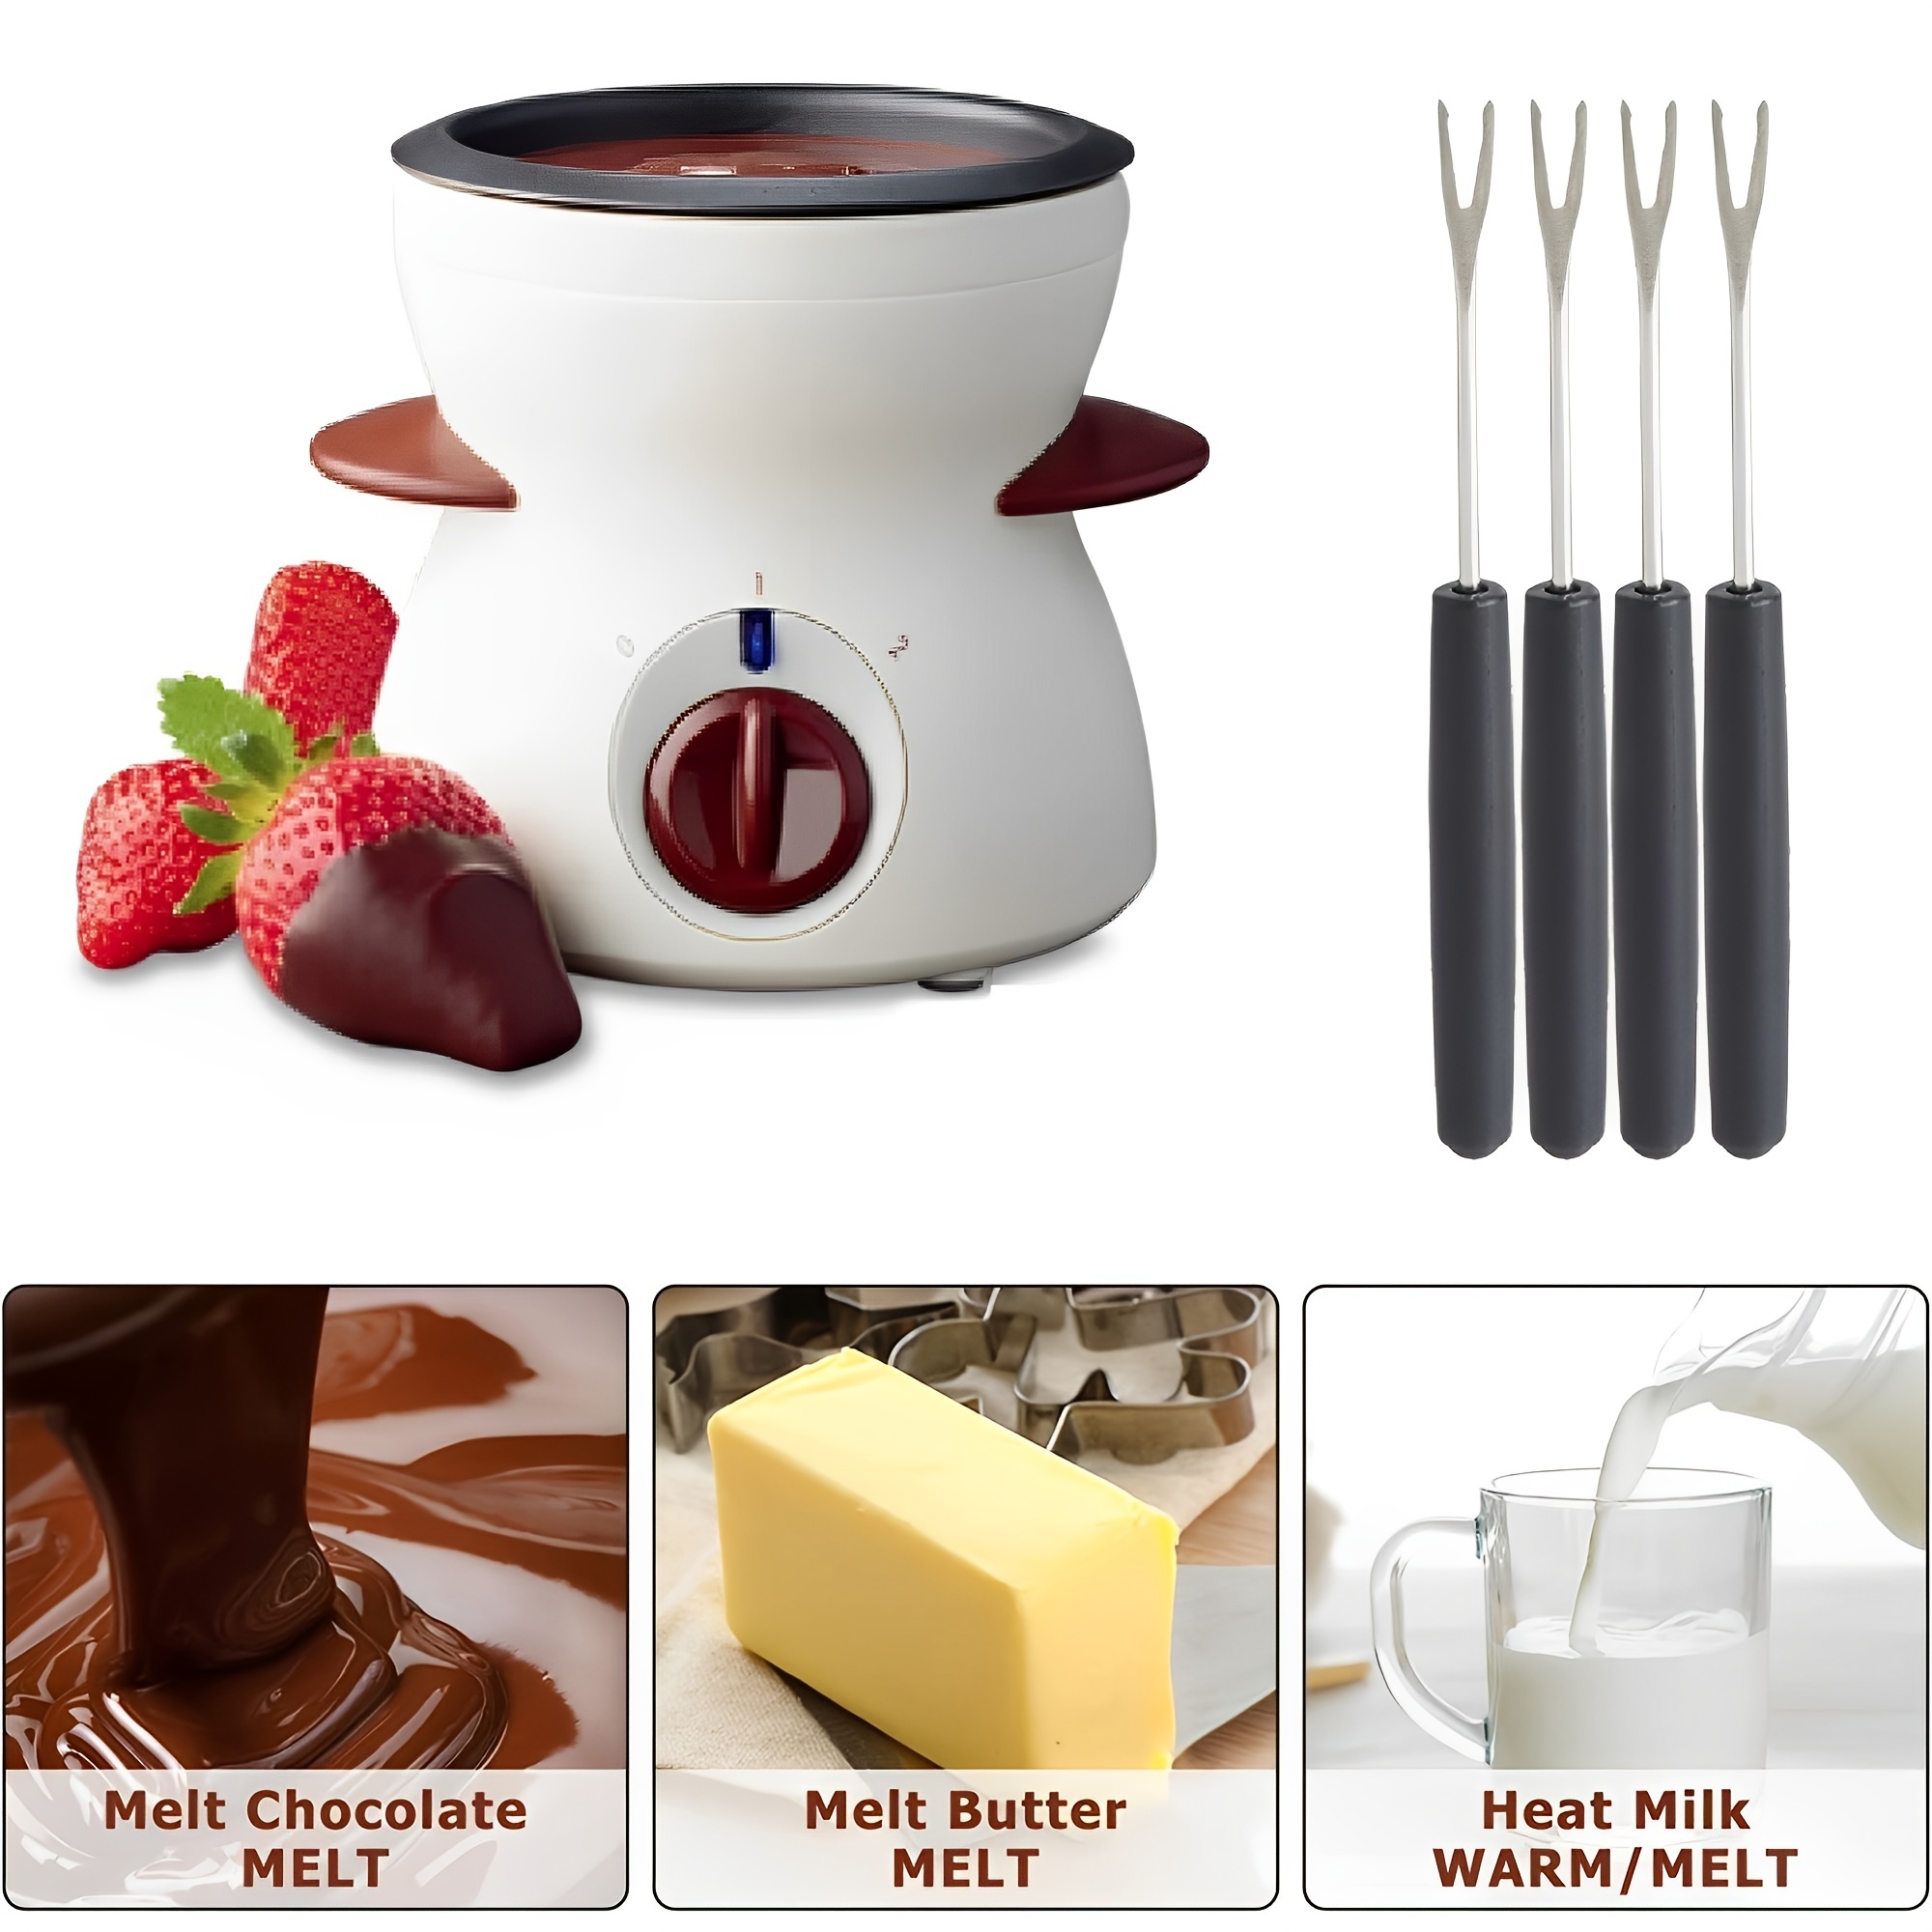 MultiOutools Mini Electric Fondue Pot Set with Dipping Forks, Chocolate  Melts Candy Melts Fondue Pot, Melting Chocolate Small Pot for Chocolate  Caramel Cheese,,kitchen accessories